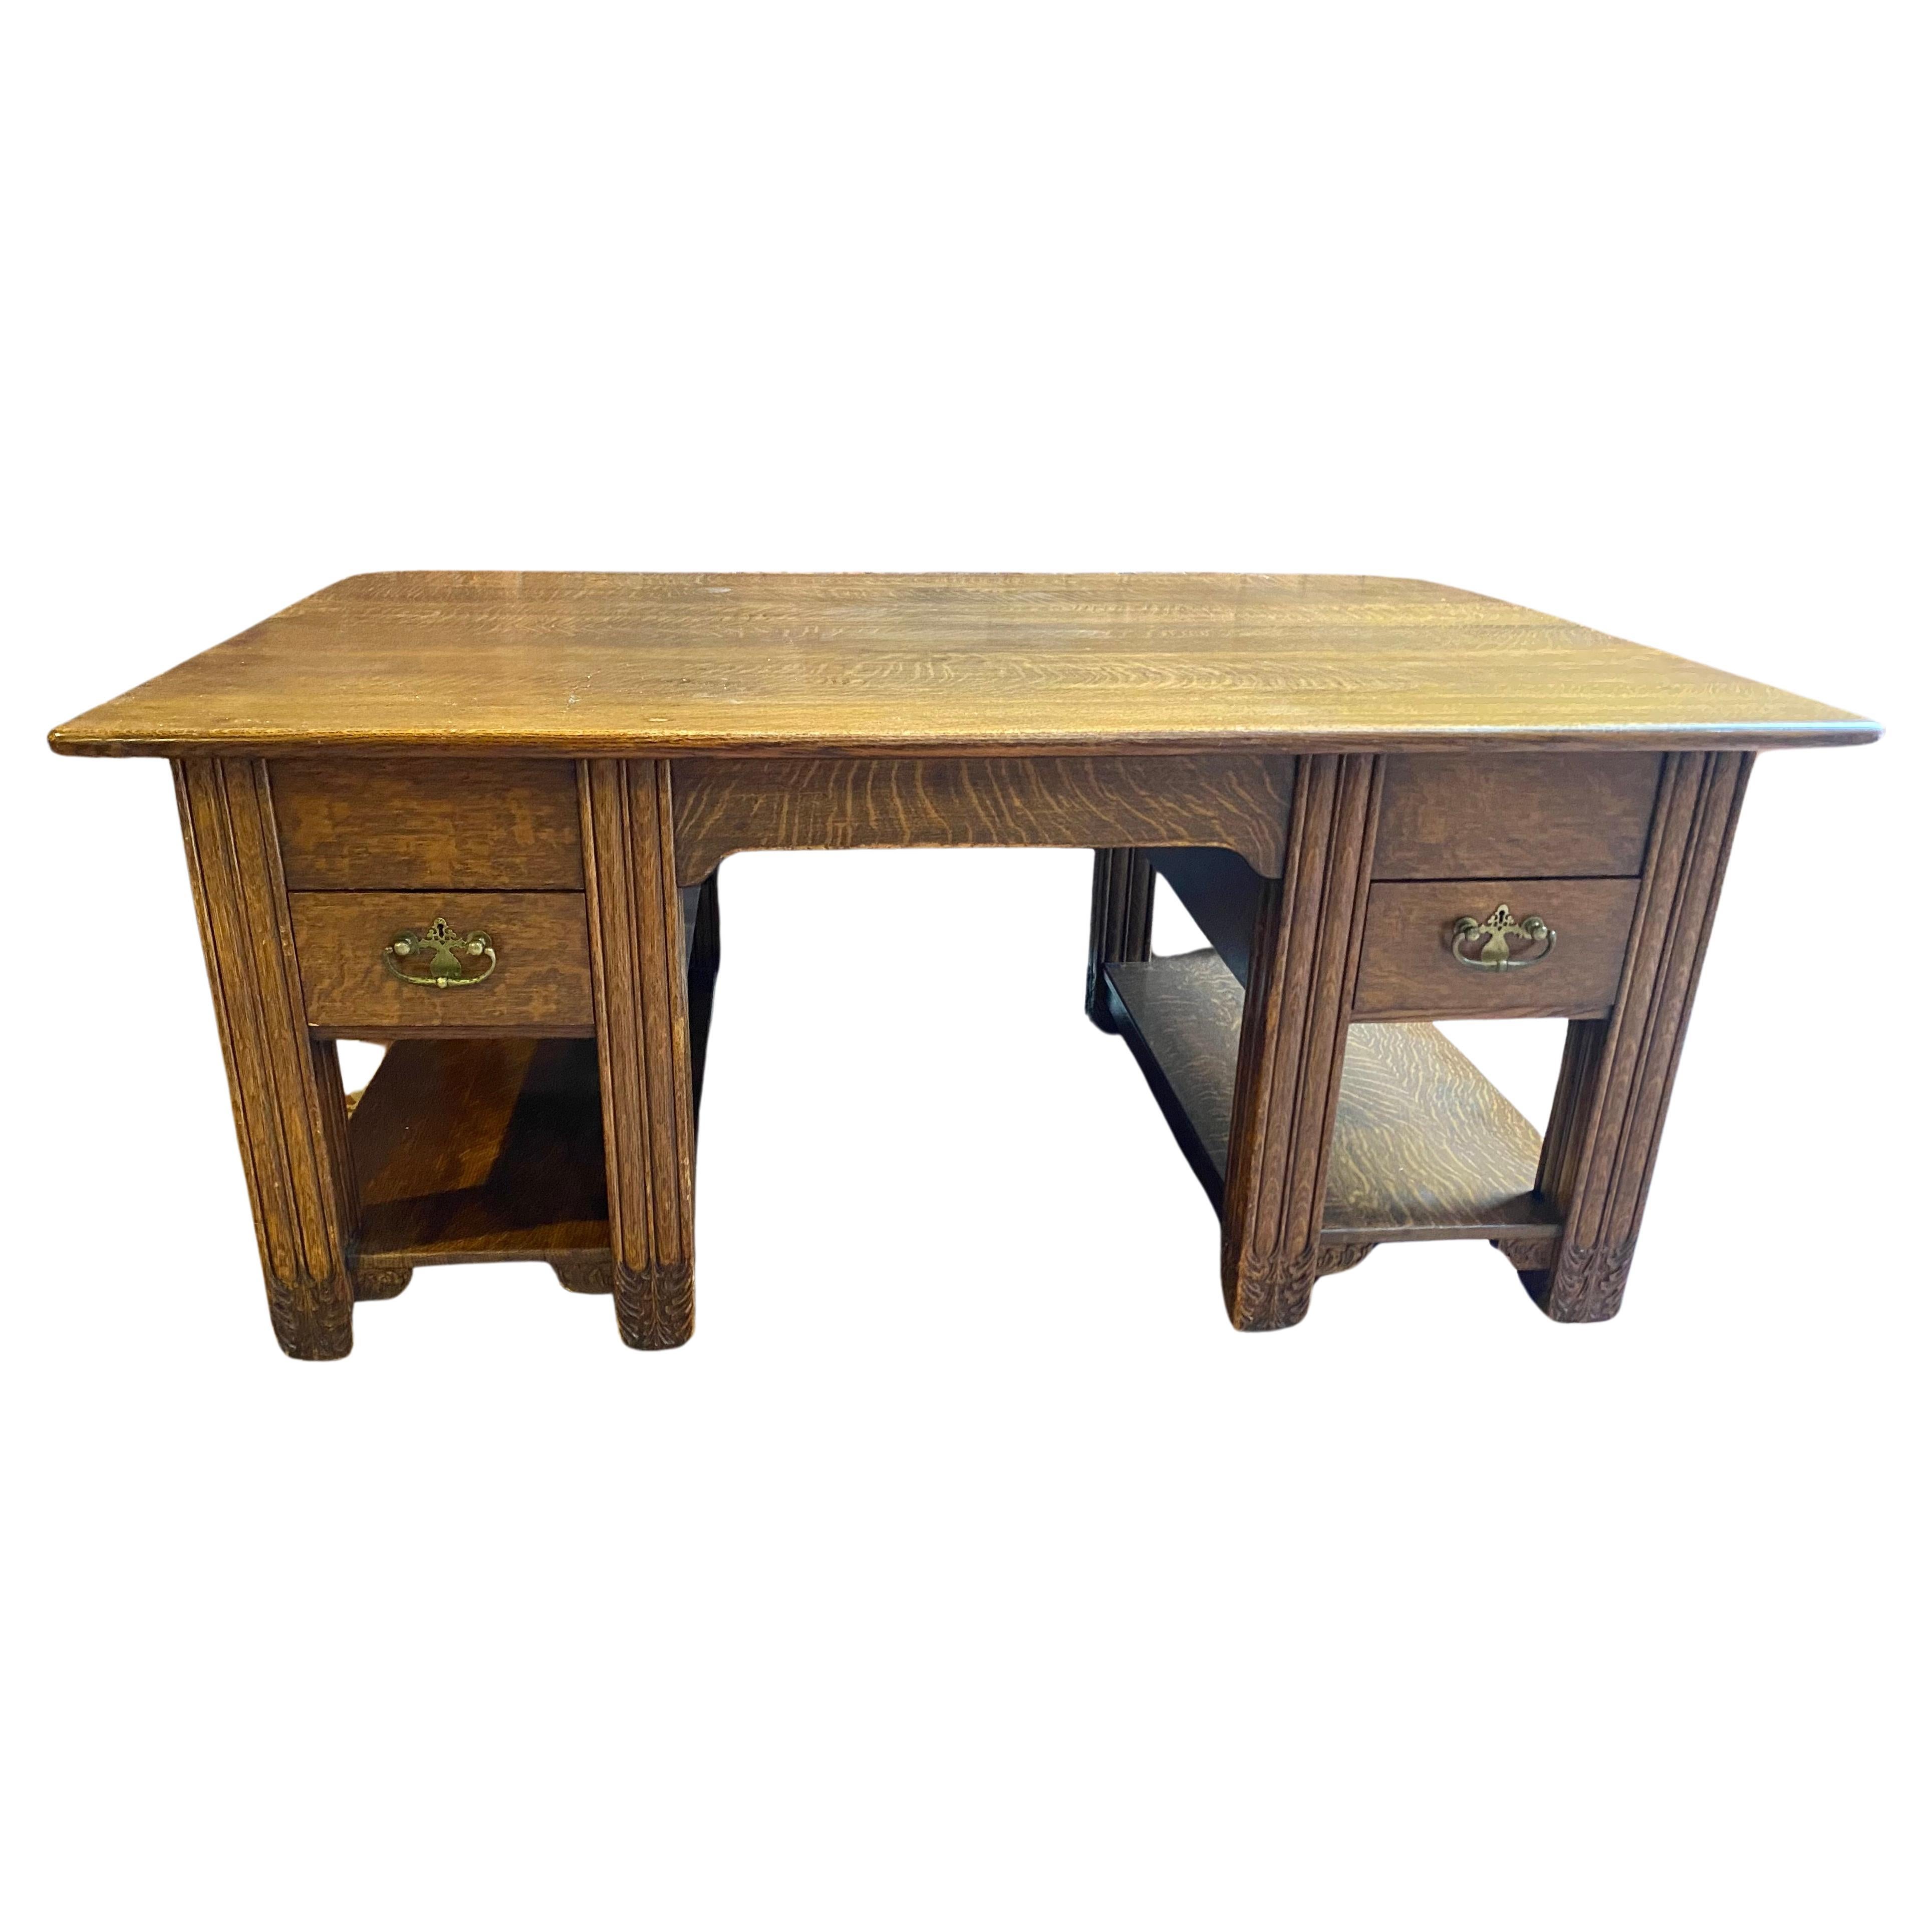 American Aesthetic Oak Partners Desk manner Louis Comfort Tiffany.. Large and handsome antique oak partner's desk, Gorgeous grain, brass hardware.carving to the massive feet.Drawers and workspace on both ends as well as storage where each person